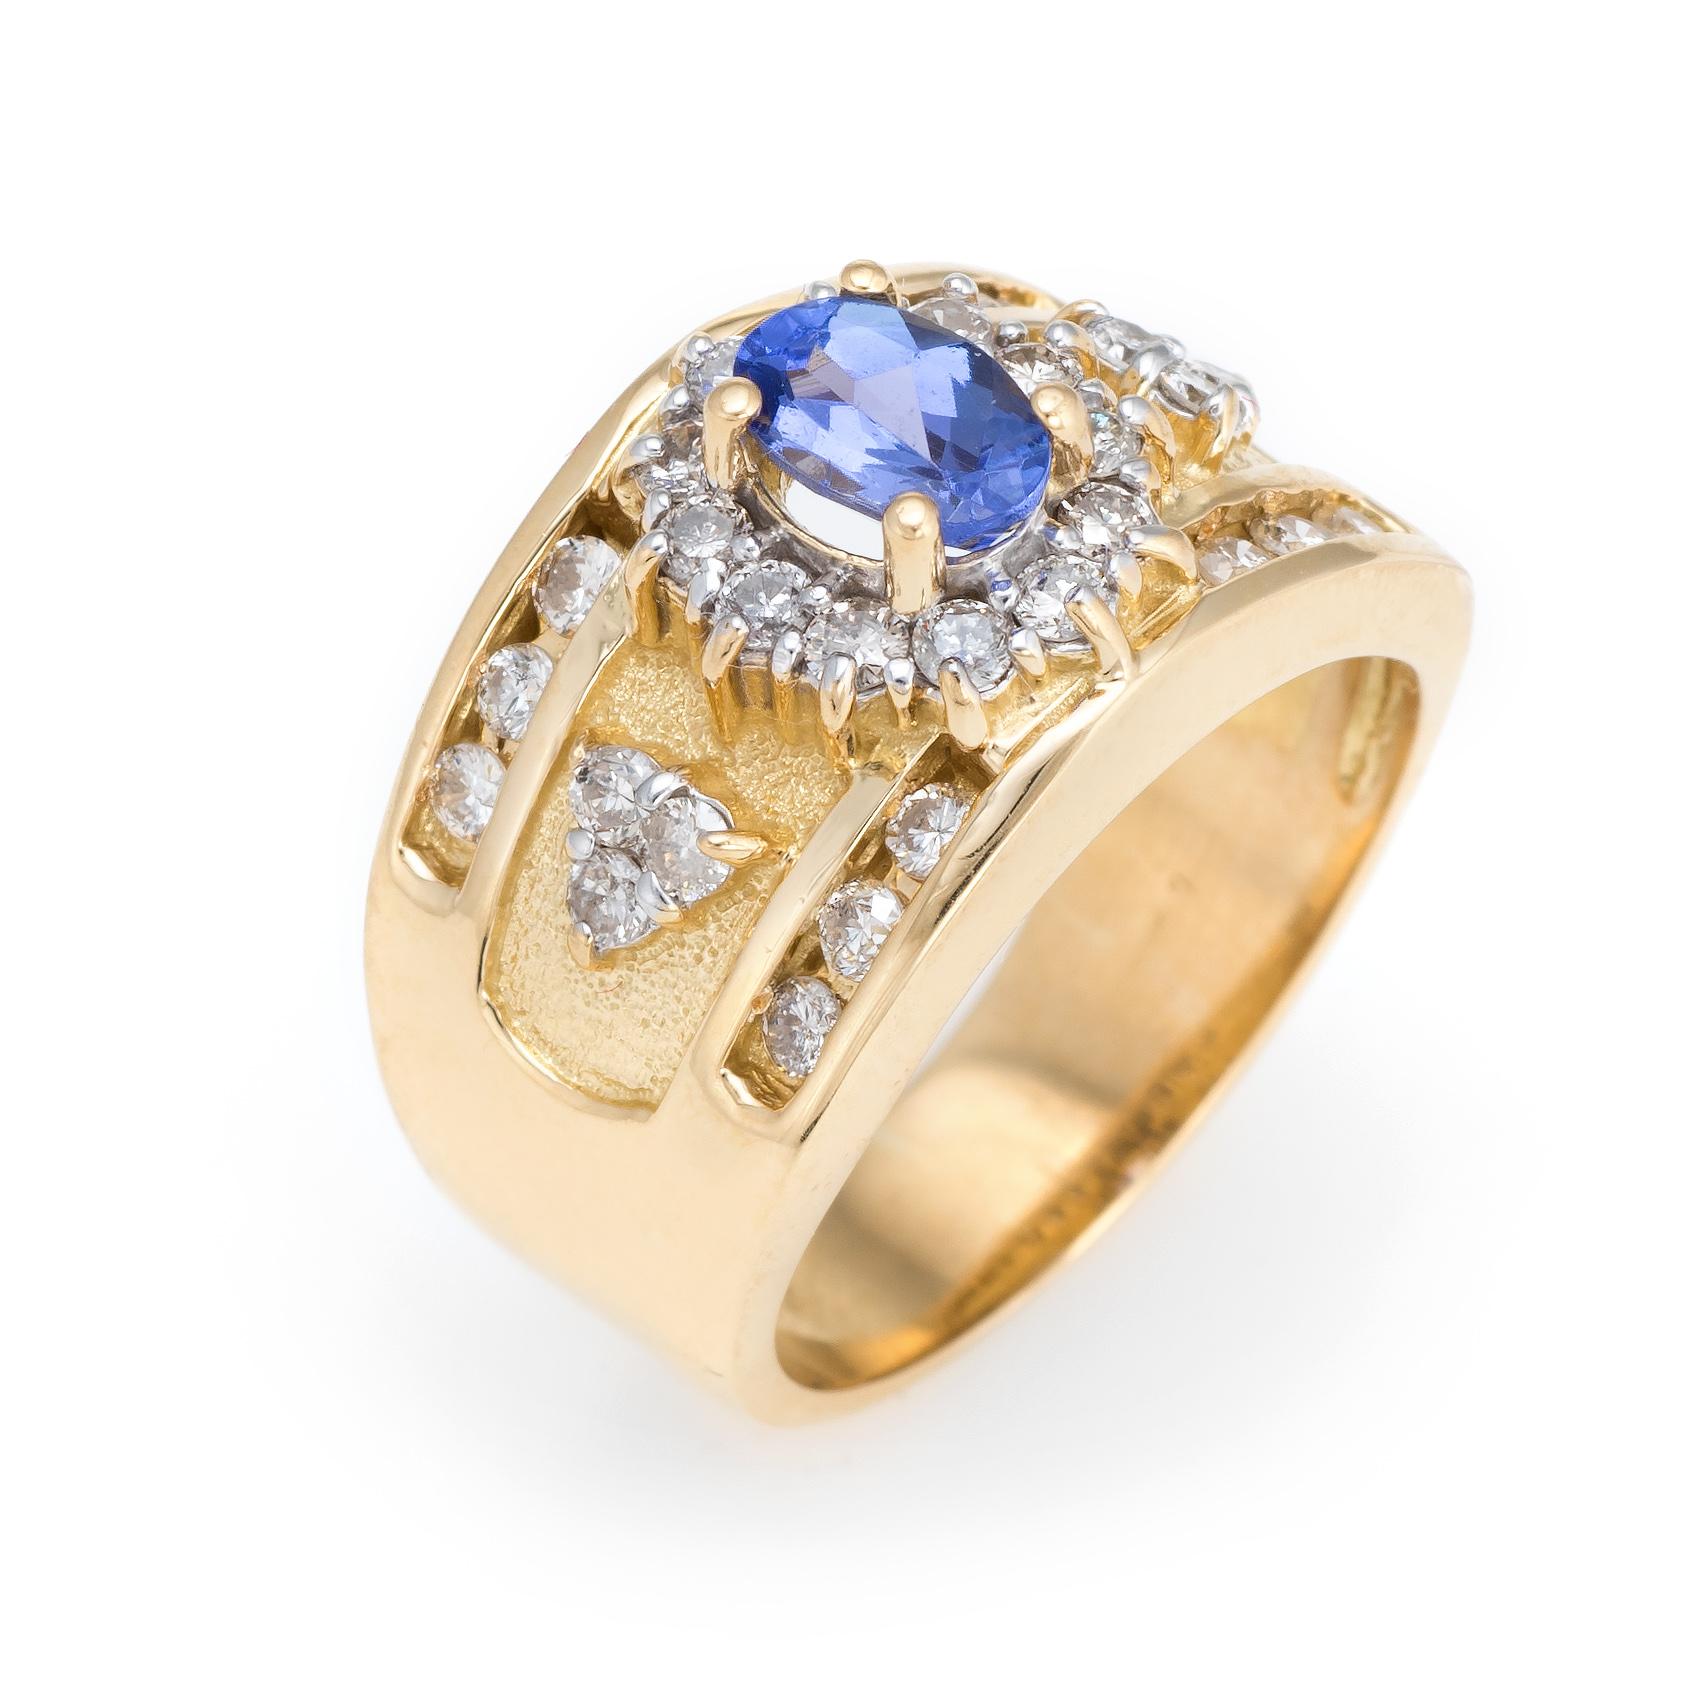 Finely detailed vintage diamond & tanzanite cigar band, crafted in 18 karat yellow gold. 

Centrally mounted tanzanite measures 6mm x 4mm (estimated at 0.75 carats), accented with 30 estimated 0.01 carat round brilliant cut diamonds. The total